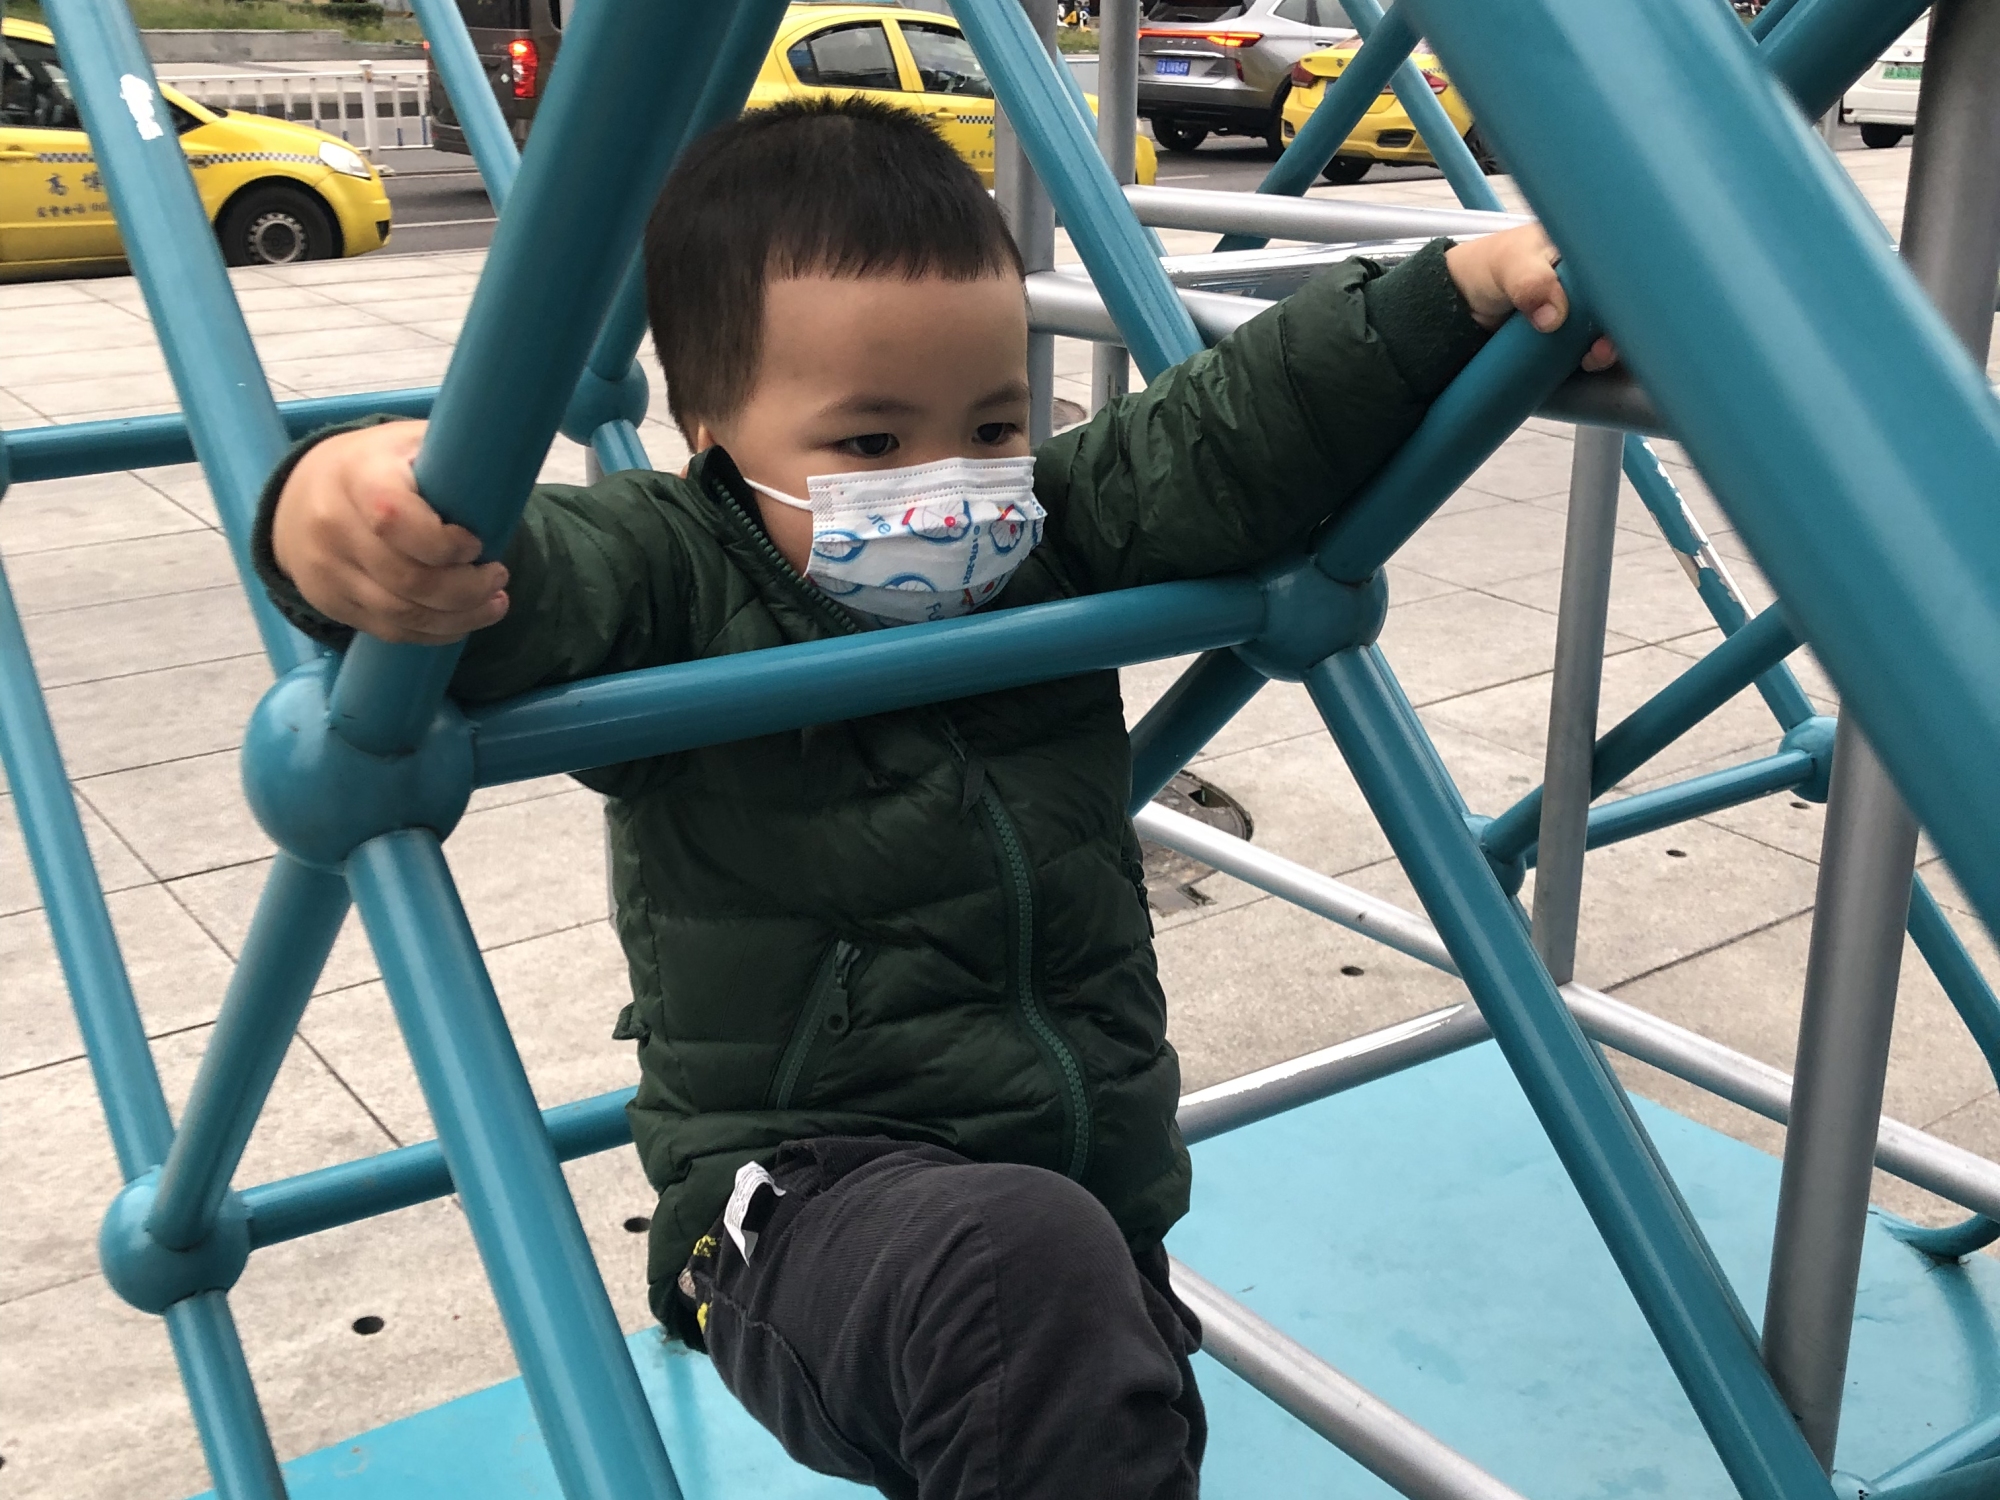 Ethan, wearing a mask in public even as he plays and climbs.